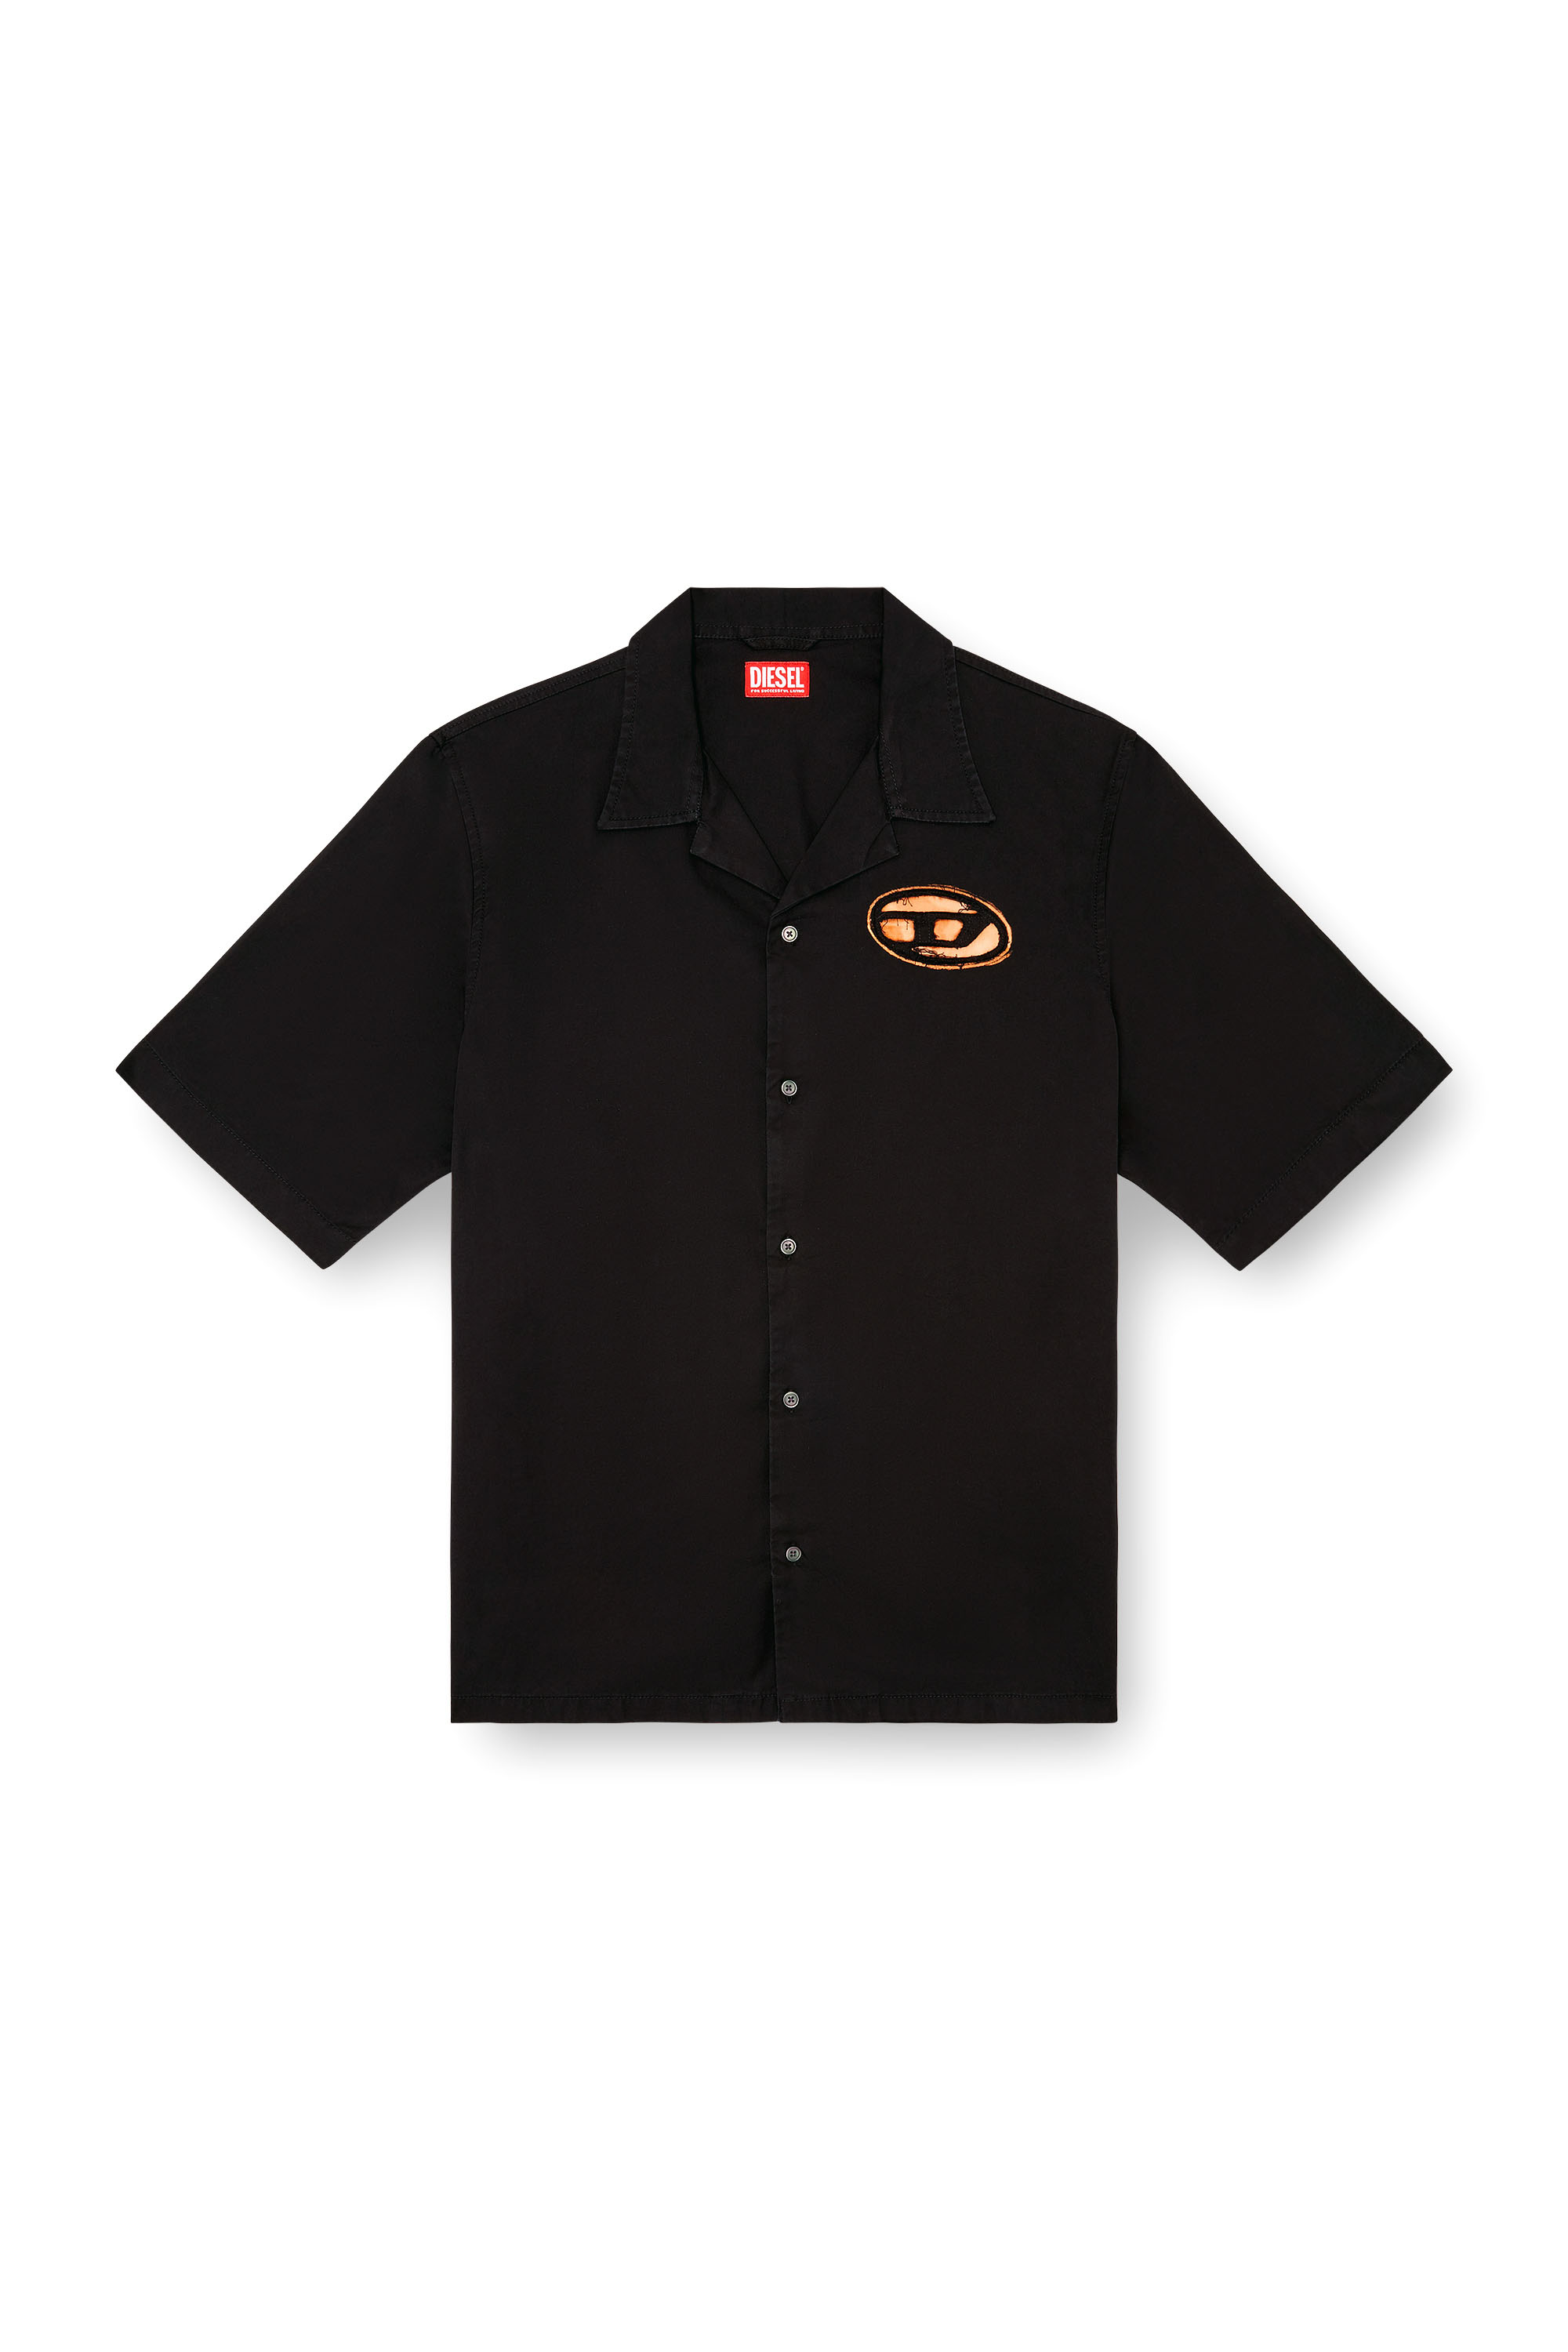 Diesel - S-STAN-BLEACH, Man Bowling shirt with bleached effect in Black - Image 4